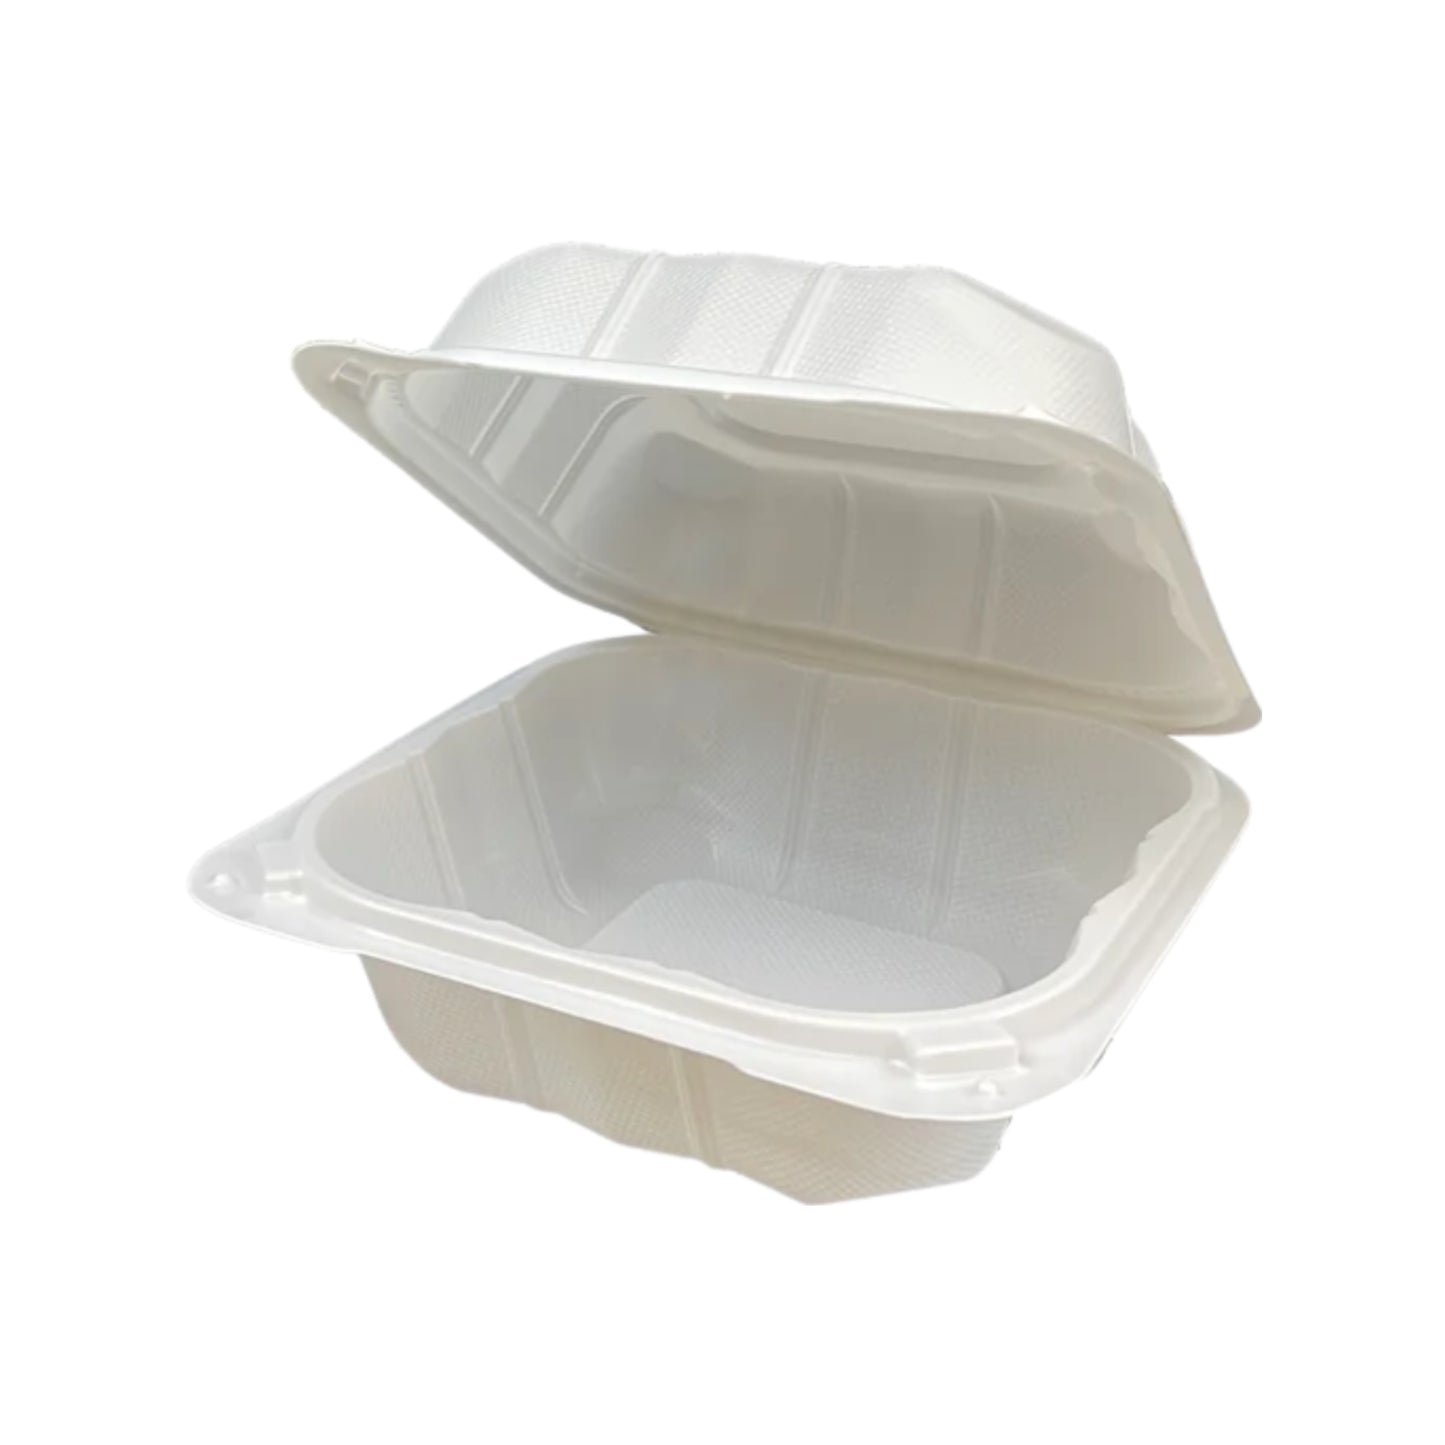 KIS-PP225G | 6x6x2.88 inches, 1-Compartment, PP Clamshell Food Container; $0.137/pc